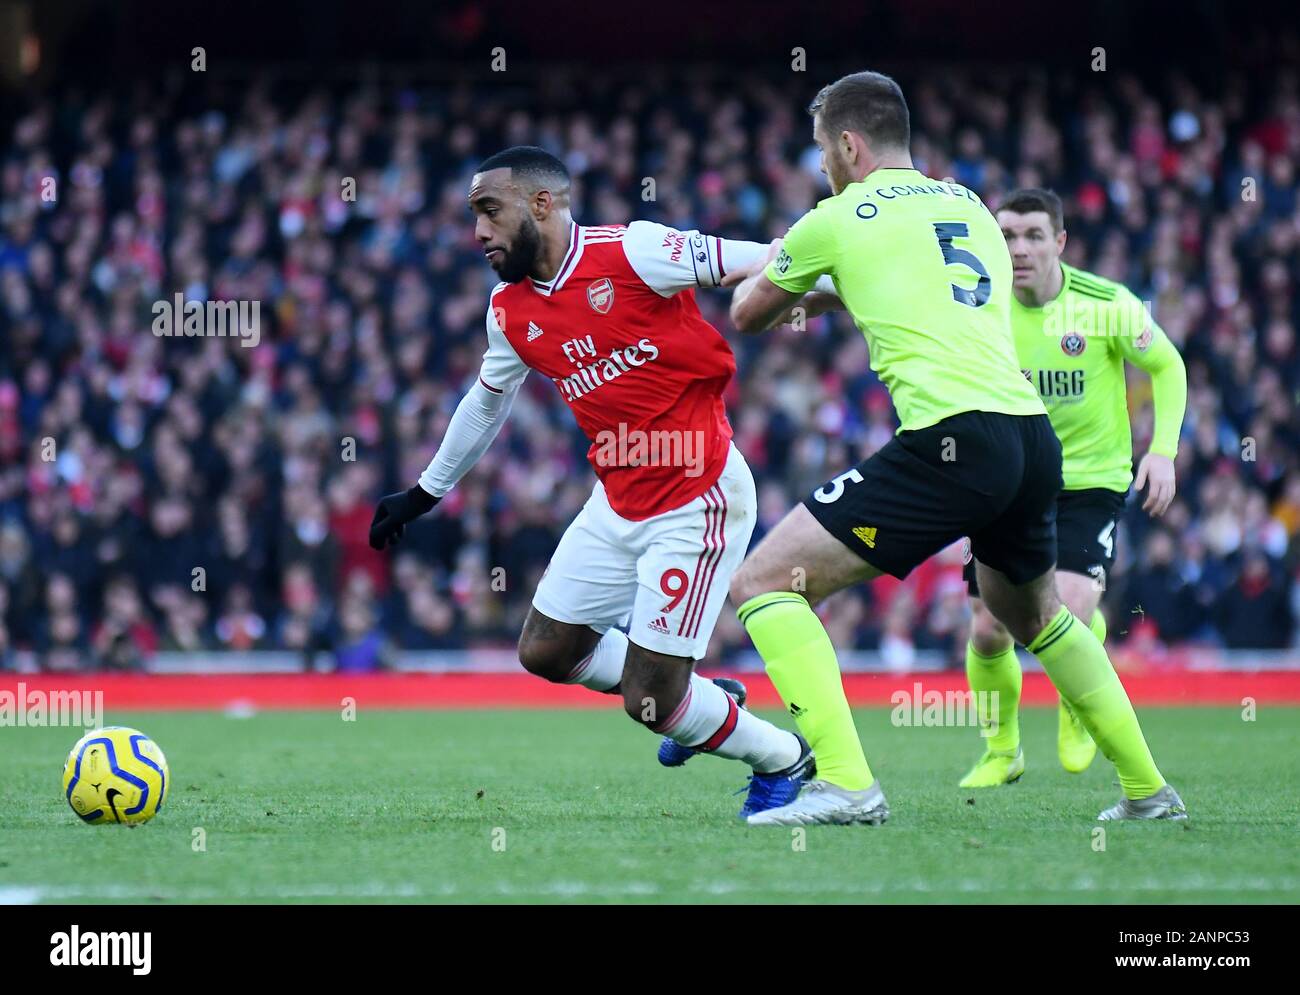 LONDON, ENGLAND - JANUARY 18, 2020: Alexandre Lacazette of Arsenal pictured during the 2019/20 Premier League game between Arsenal FC and Sheffield United FC at Emirates Stadium. Stock Photo